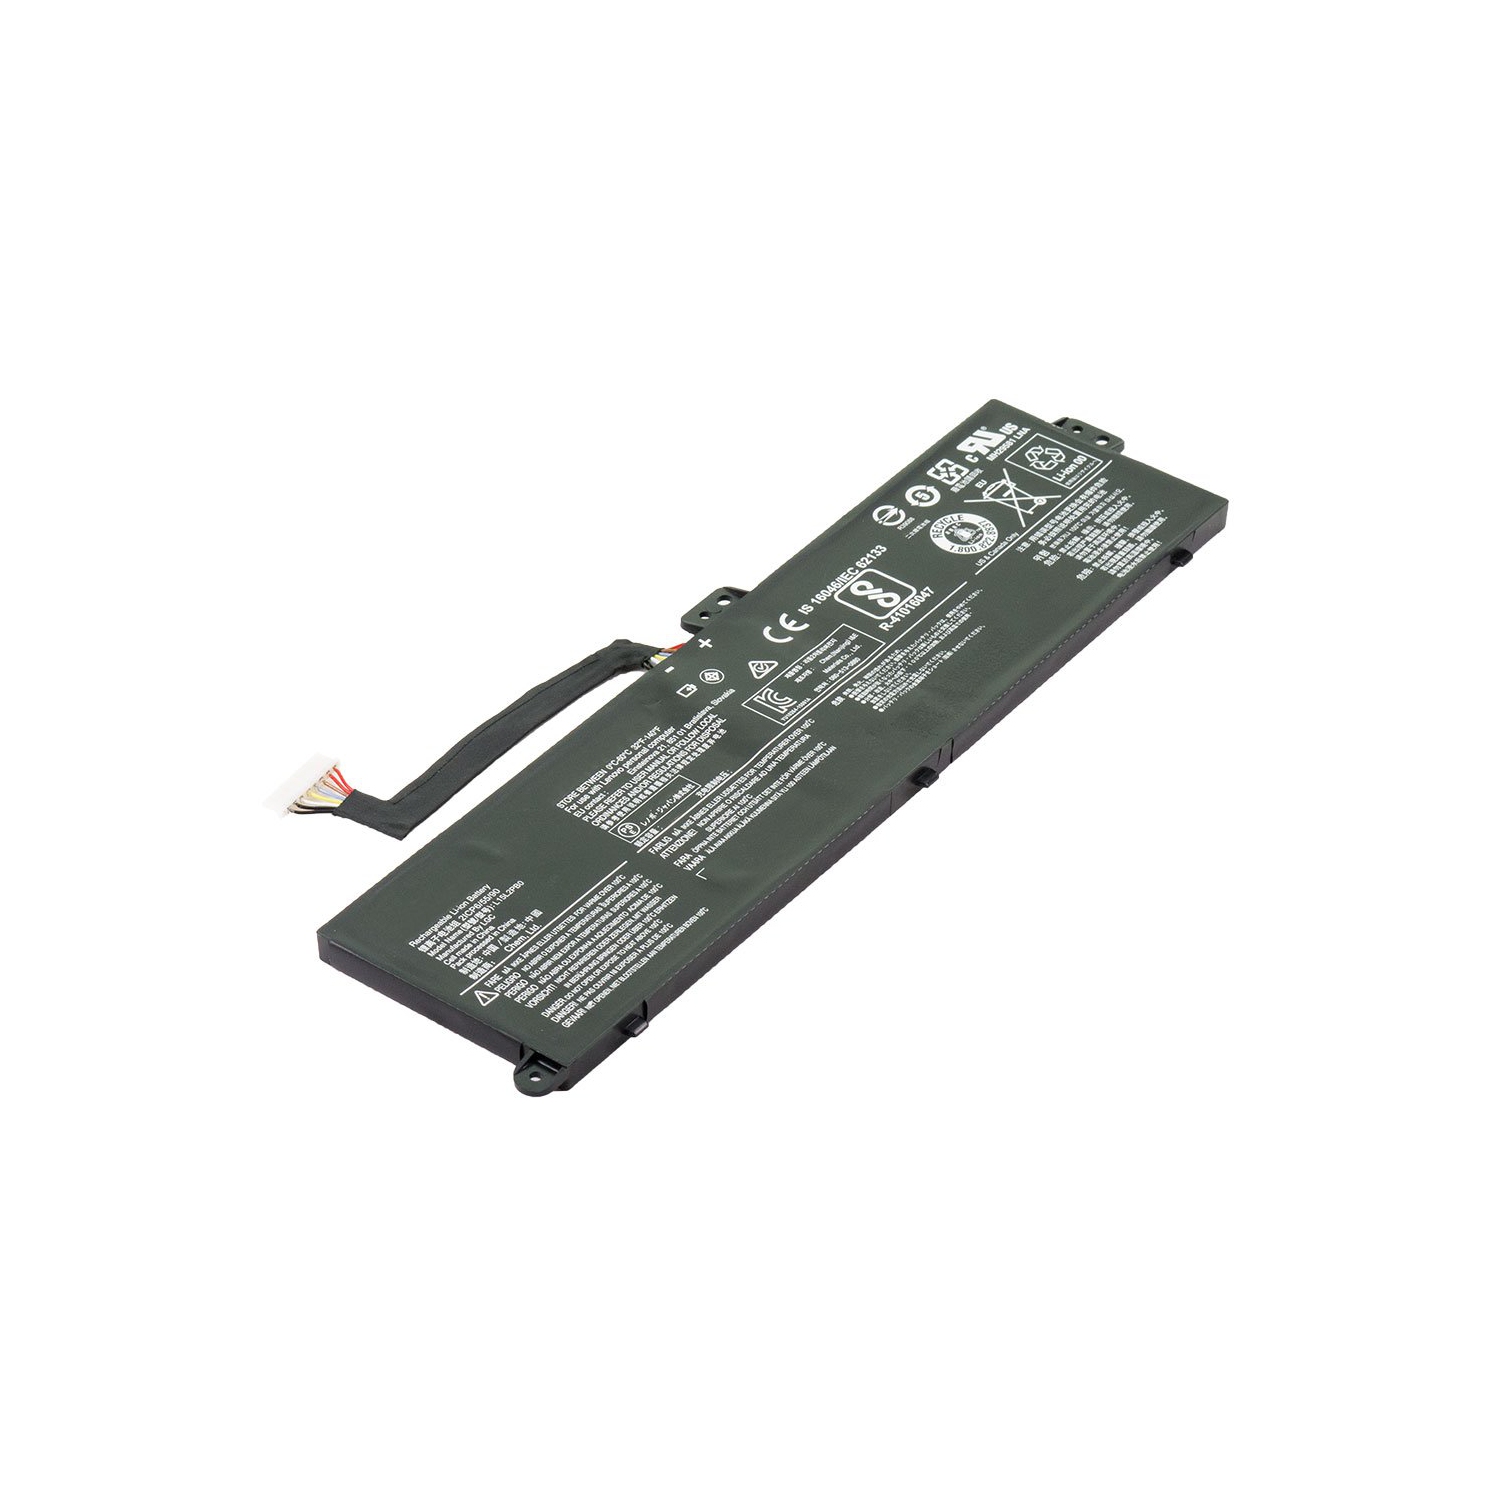 Laptop Battery Replacement for Lenovo 100S Chromebook-11IBY 80QN0006CF, 5B10J46559, 5B10J46560, 5B10J46561, L15L2PB0, L15M2PB0